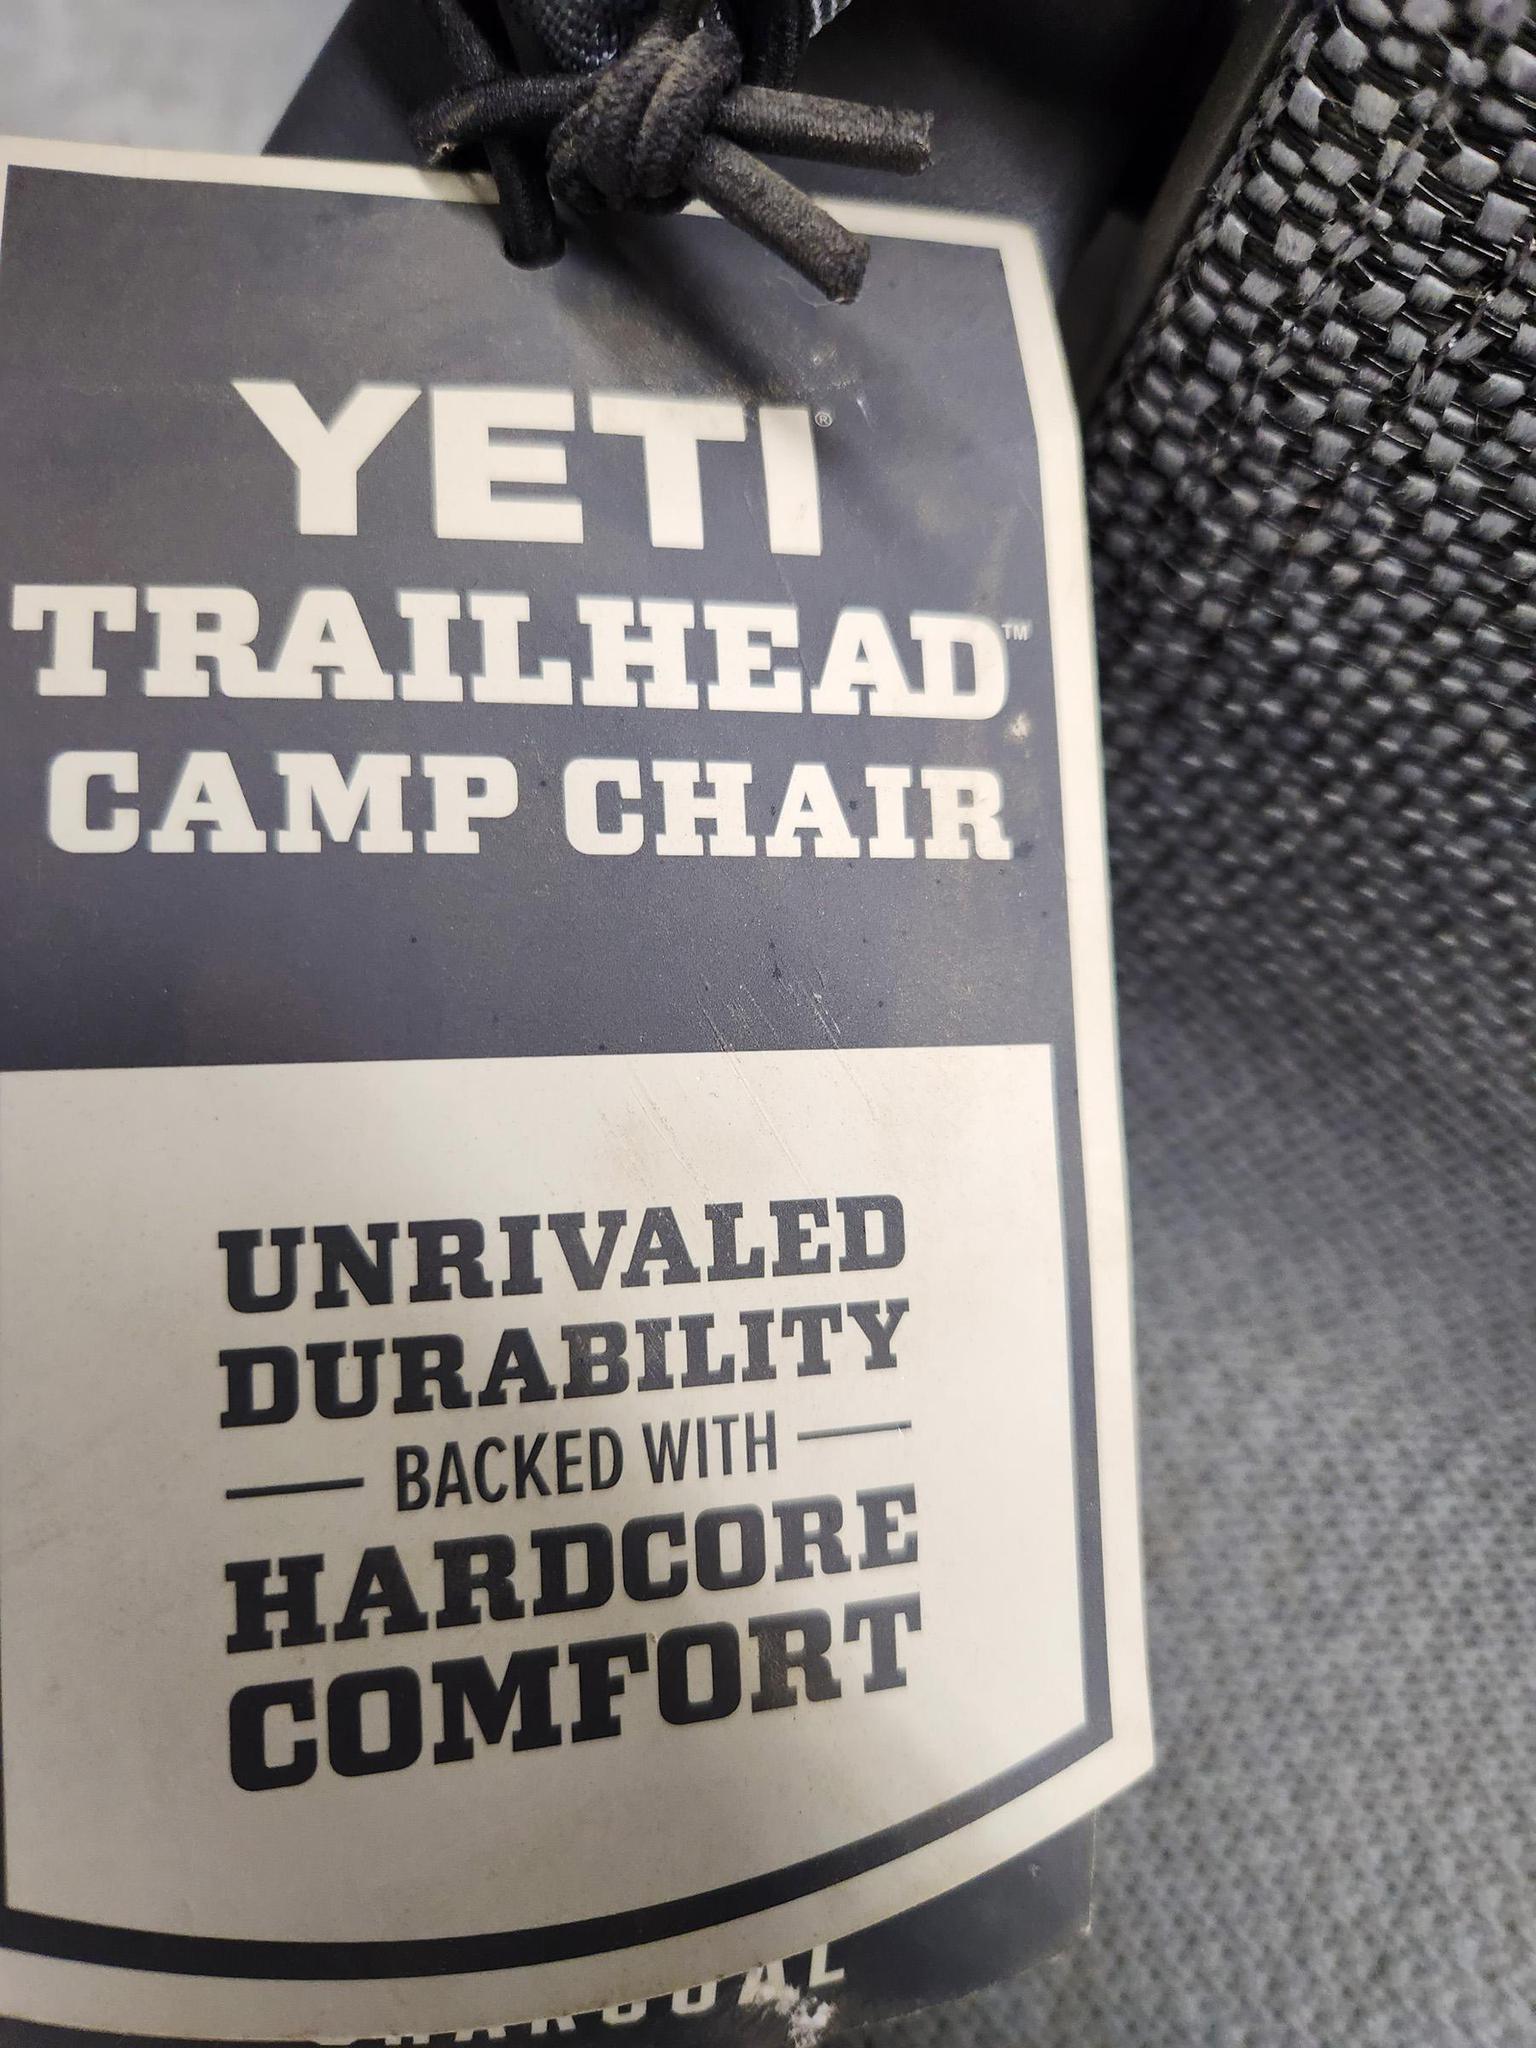 Yeti Releases New Coolers and Camp Chairs for 2020